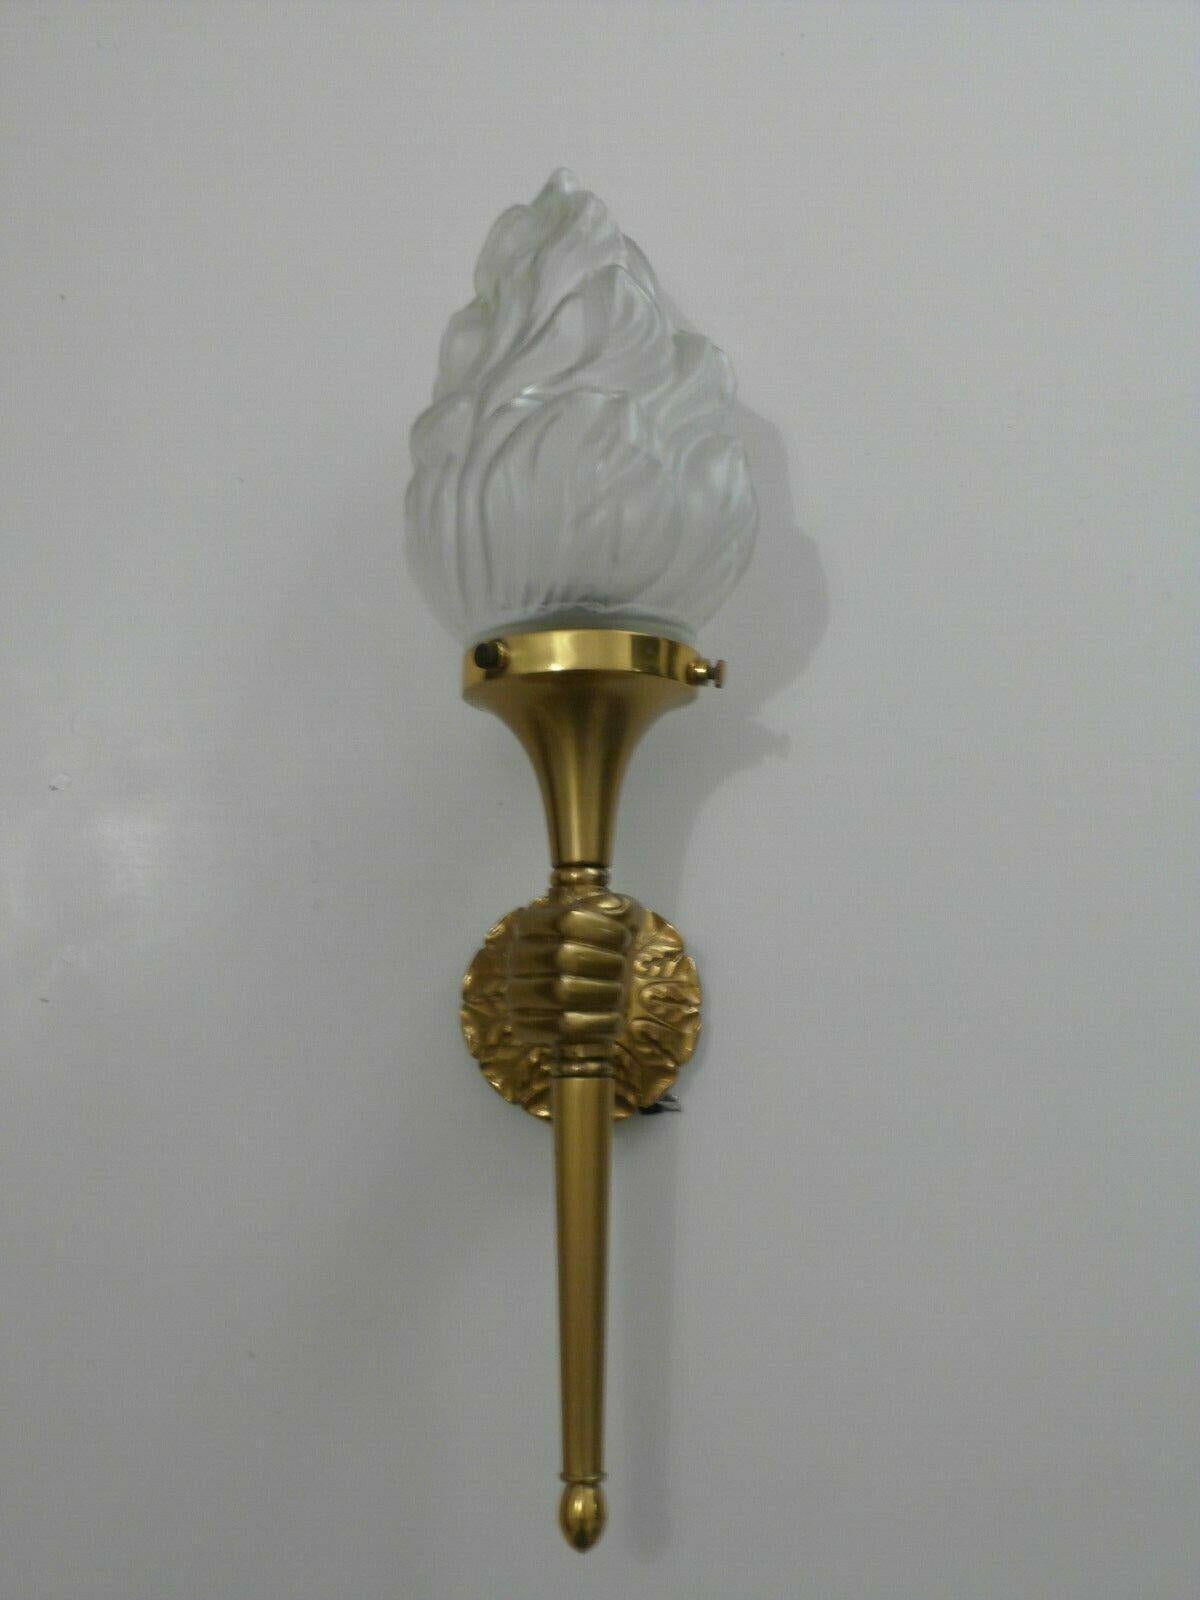 1930's French Art Deco Gilt Bronze Hand / Fist Holding Torch Wall Sconce  For Sale 3